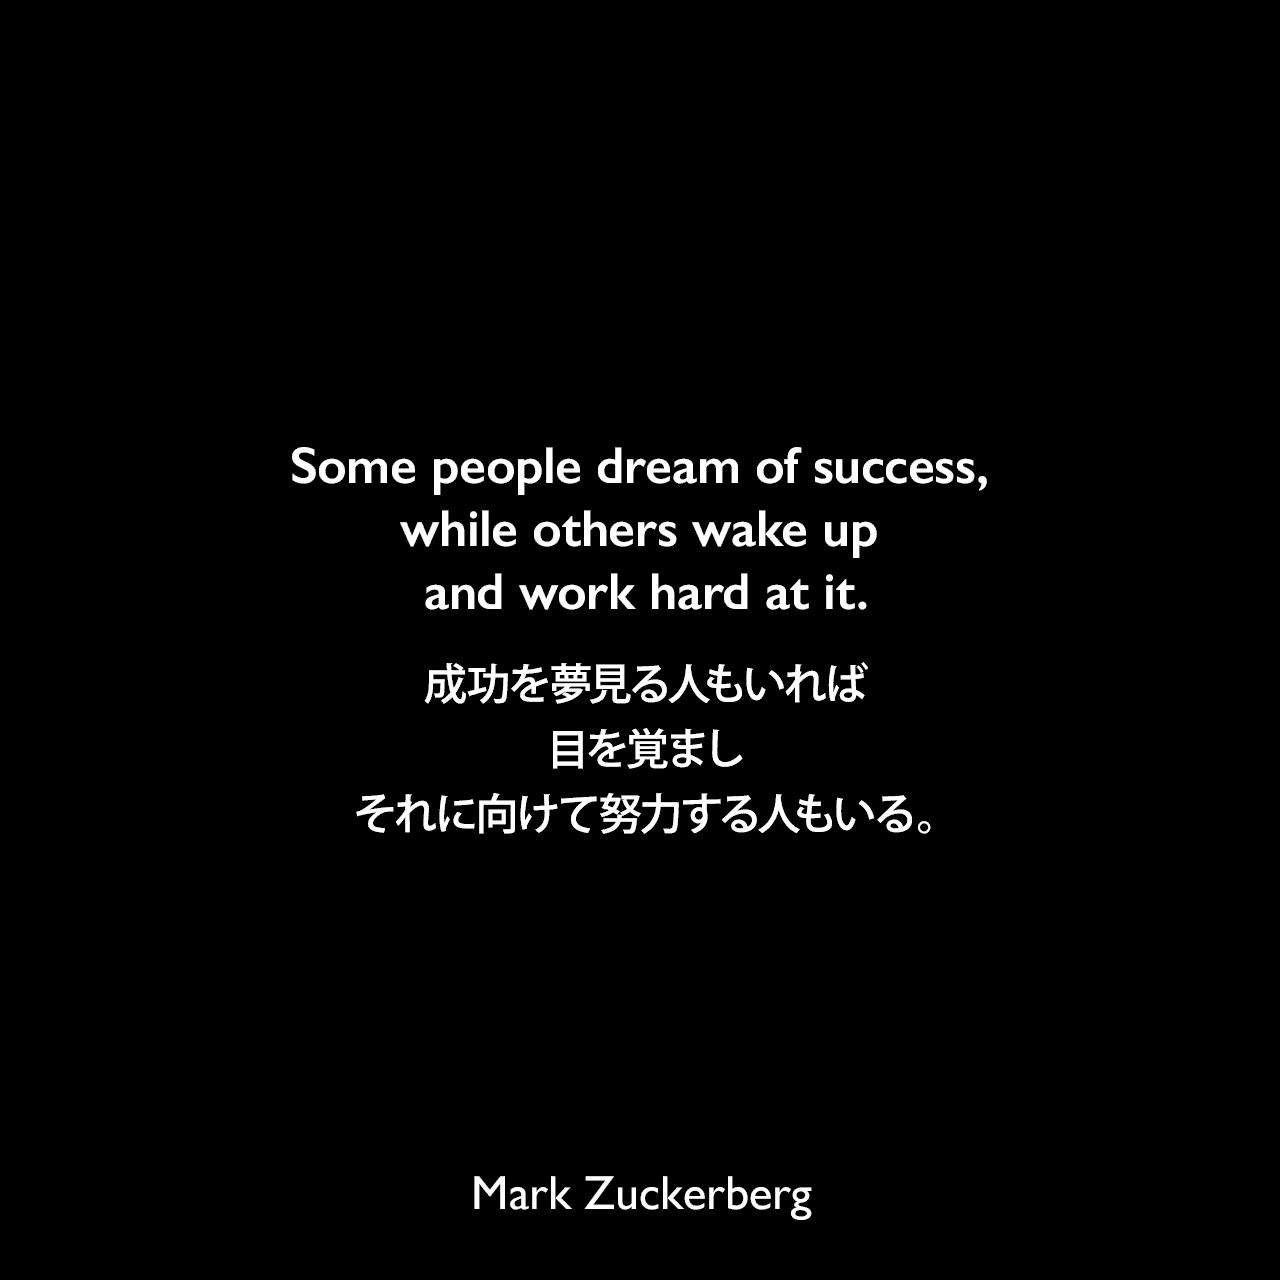 Some people dream of success, while others wake up and work hard at it.成功を夢見る人もいれば、目を覚ましそれに向けて努力する人もいる。Mark Zuckerberg